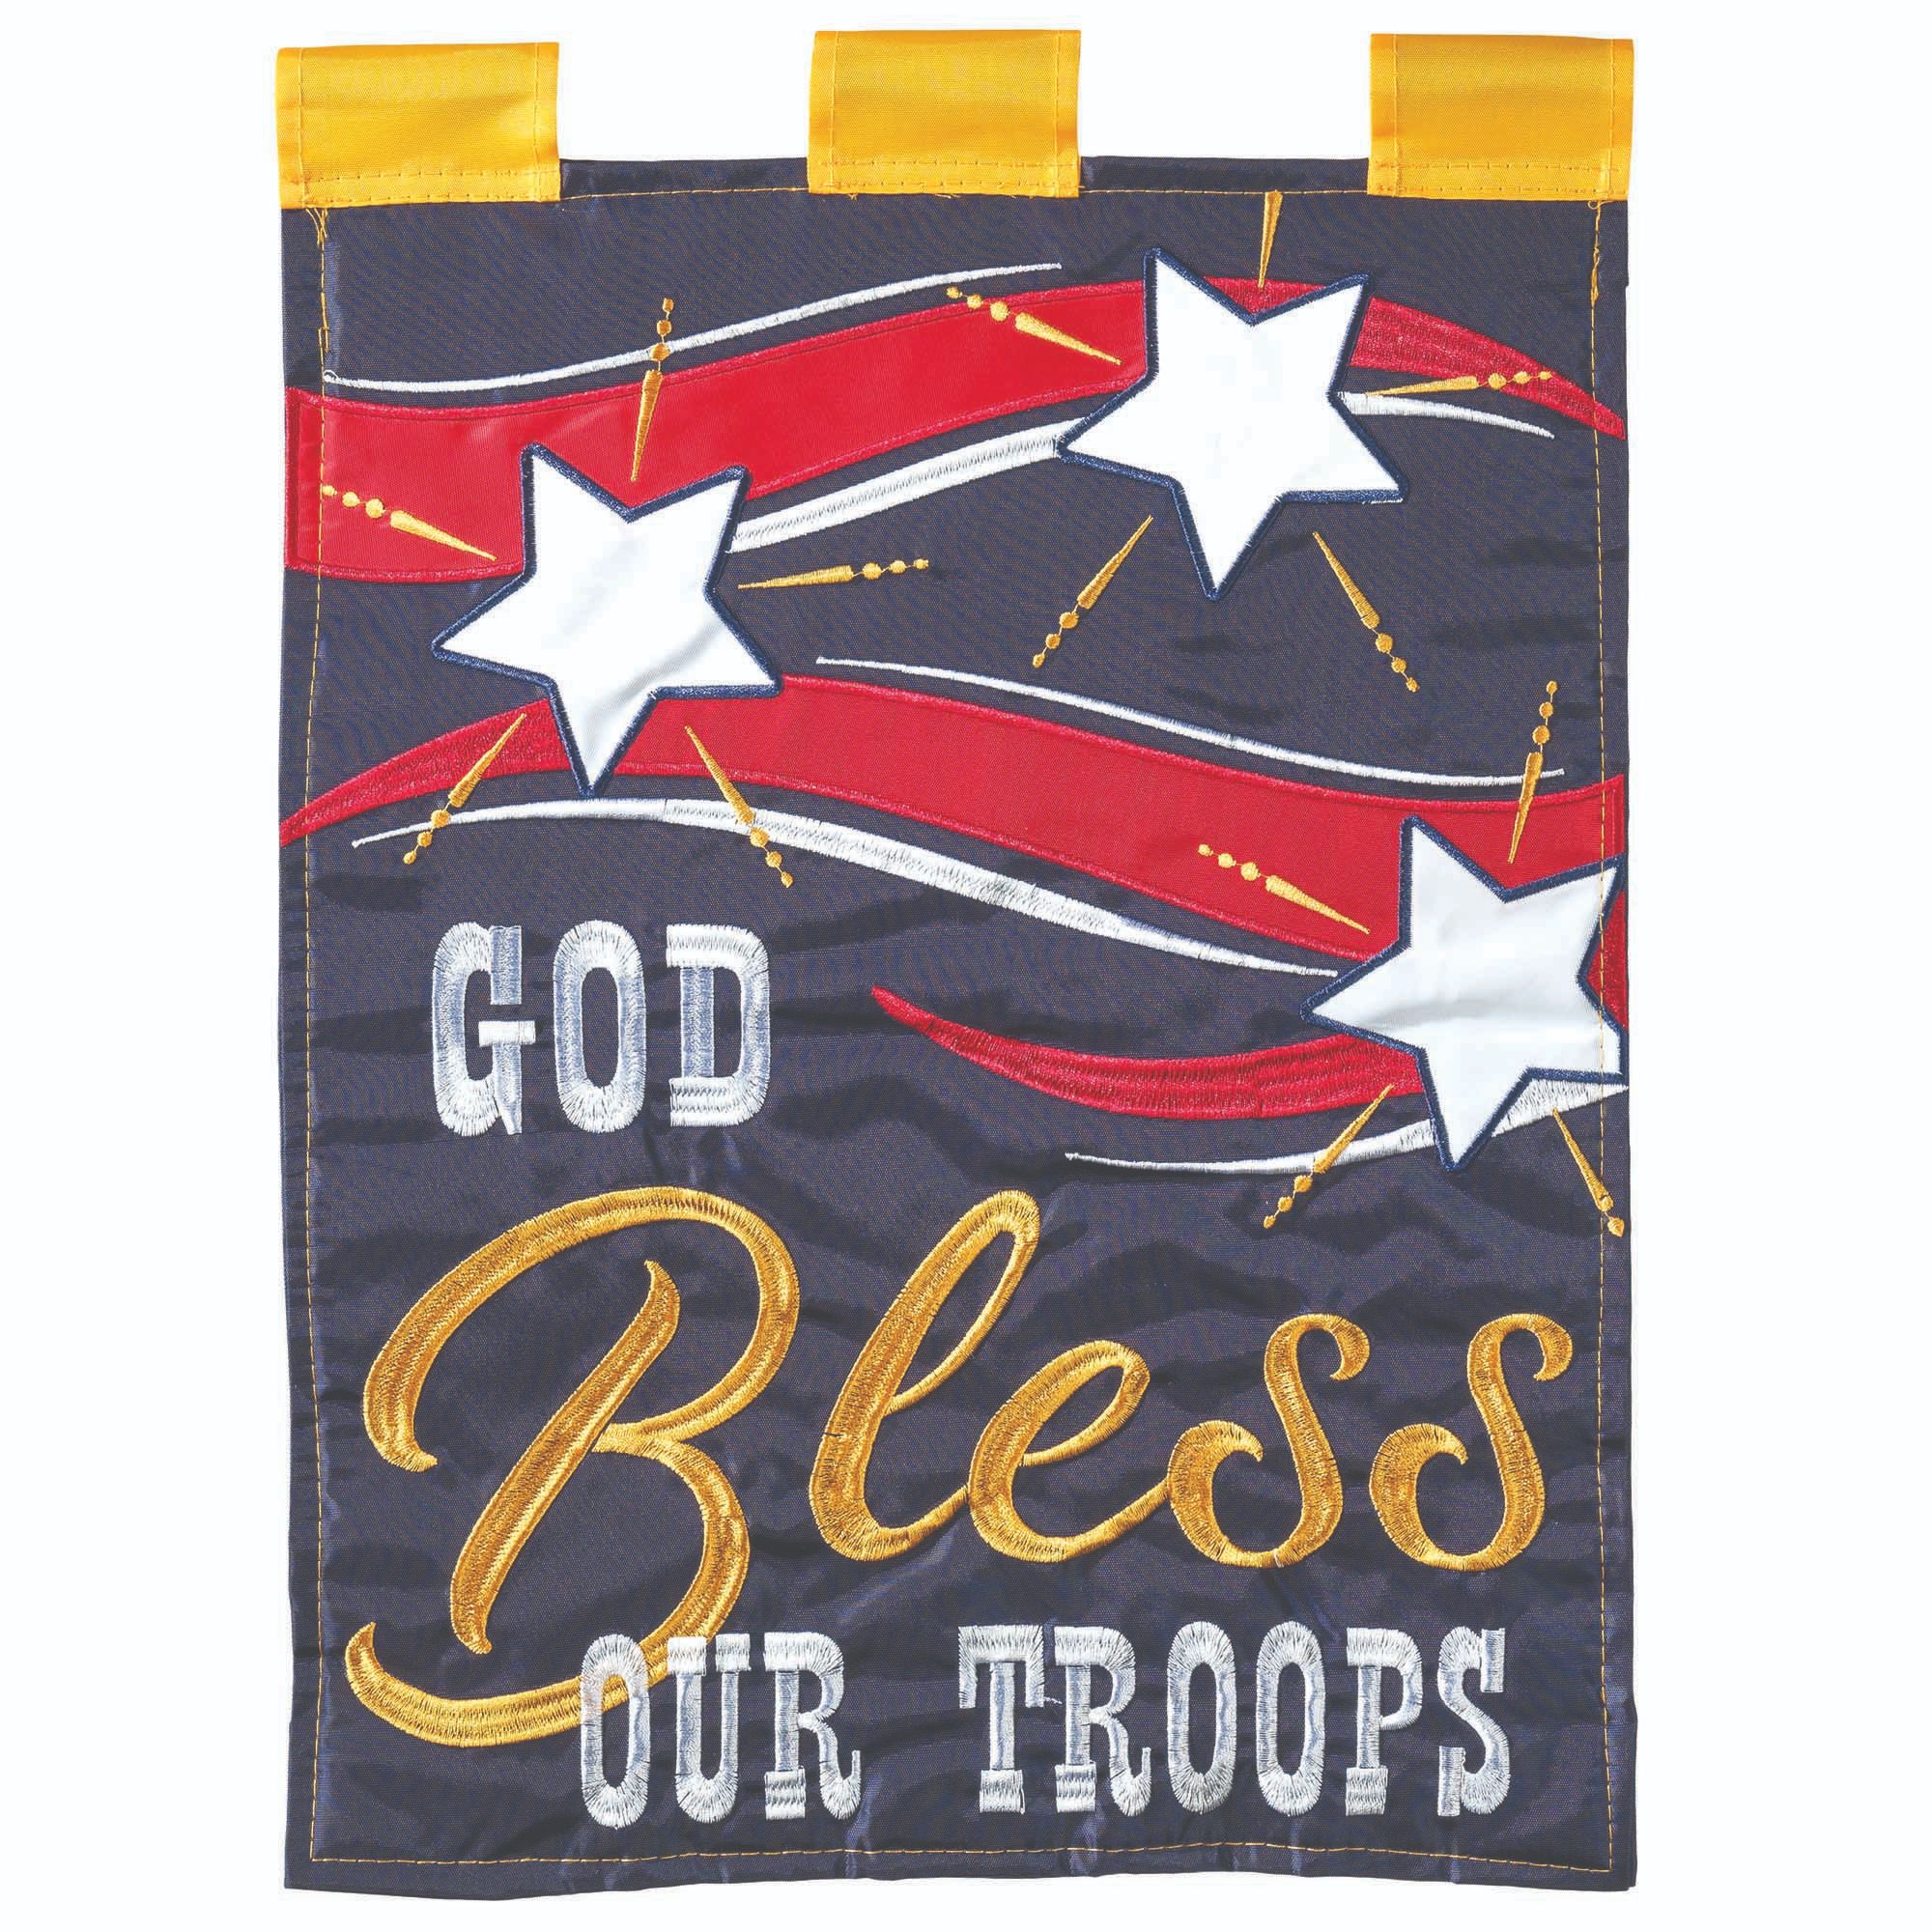 Contemporary Home Living Blue and Red "GOD Bless OUR TROOPS" Printed Garden Flag 18" x 13"